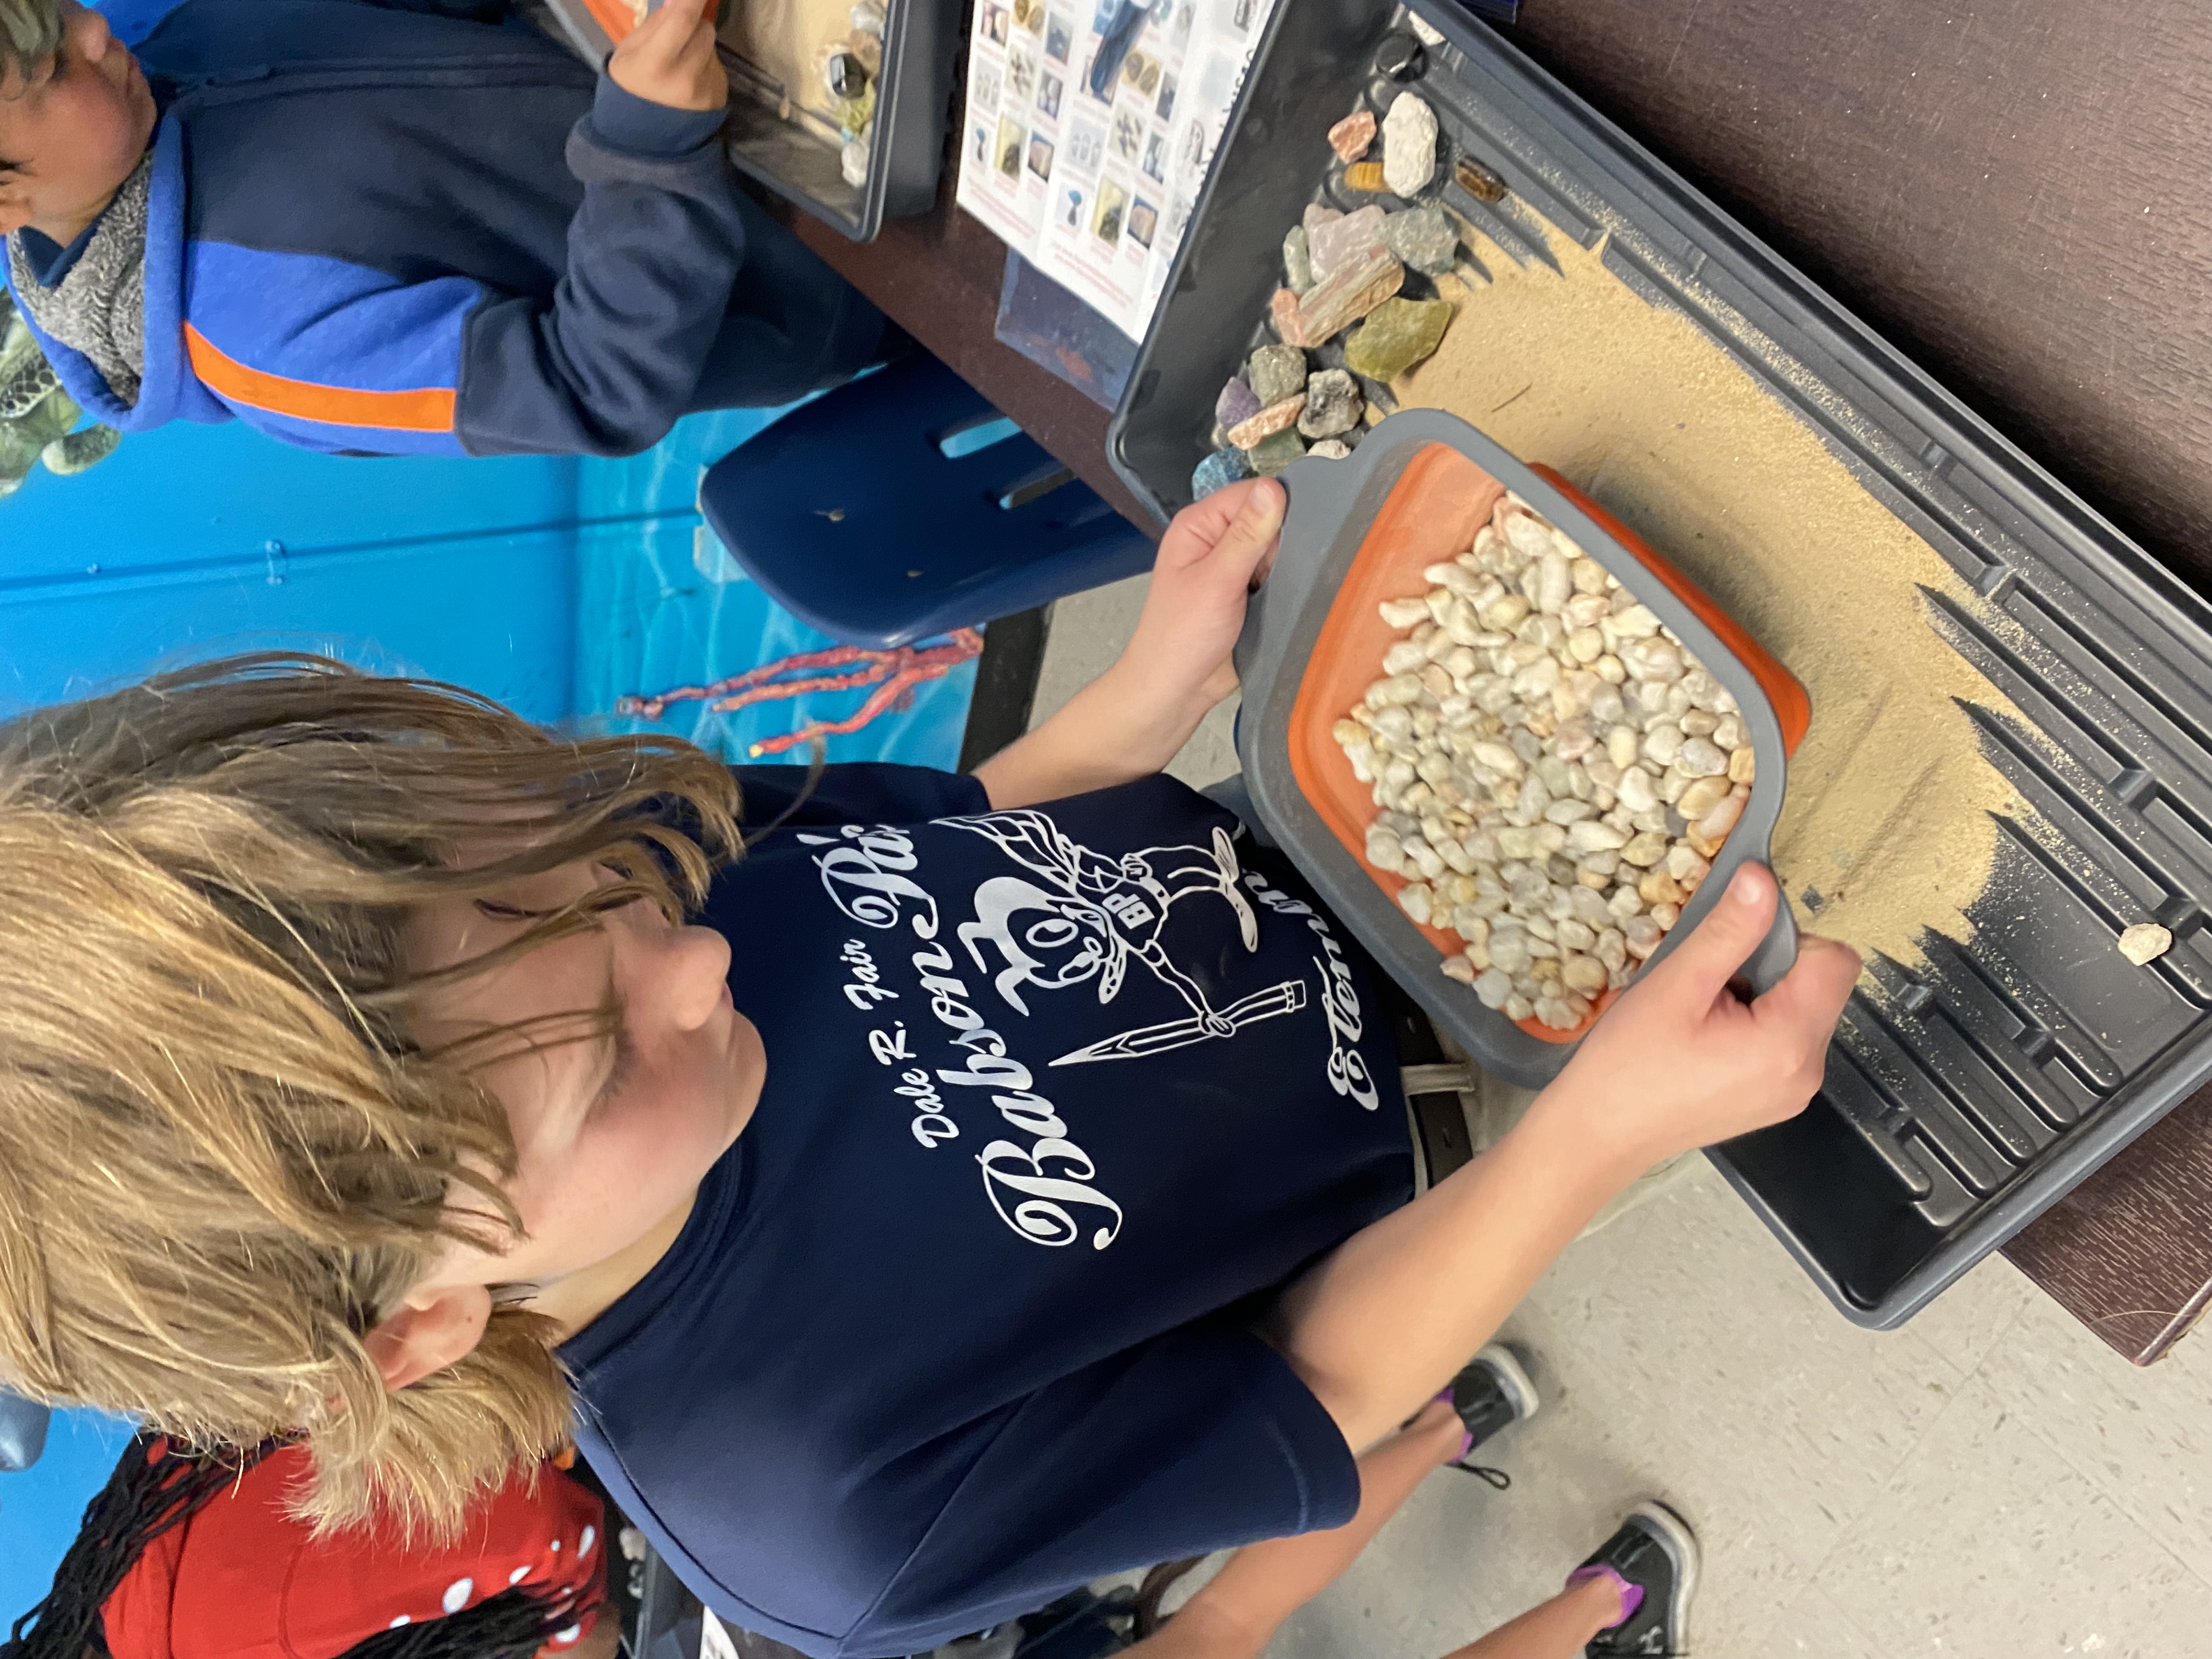 4th grade students mining for rocks and minerals.